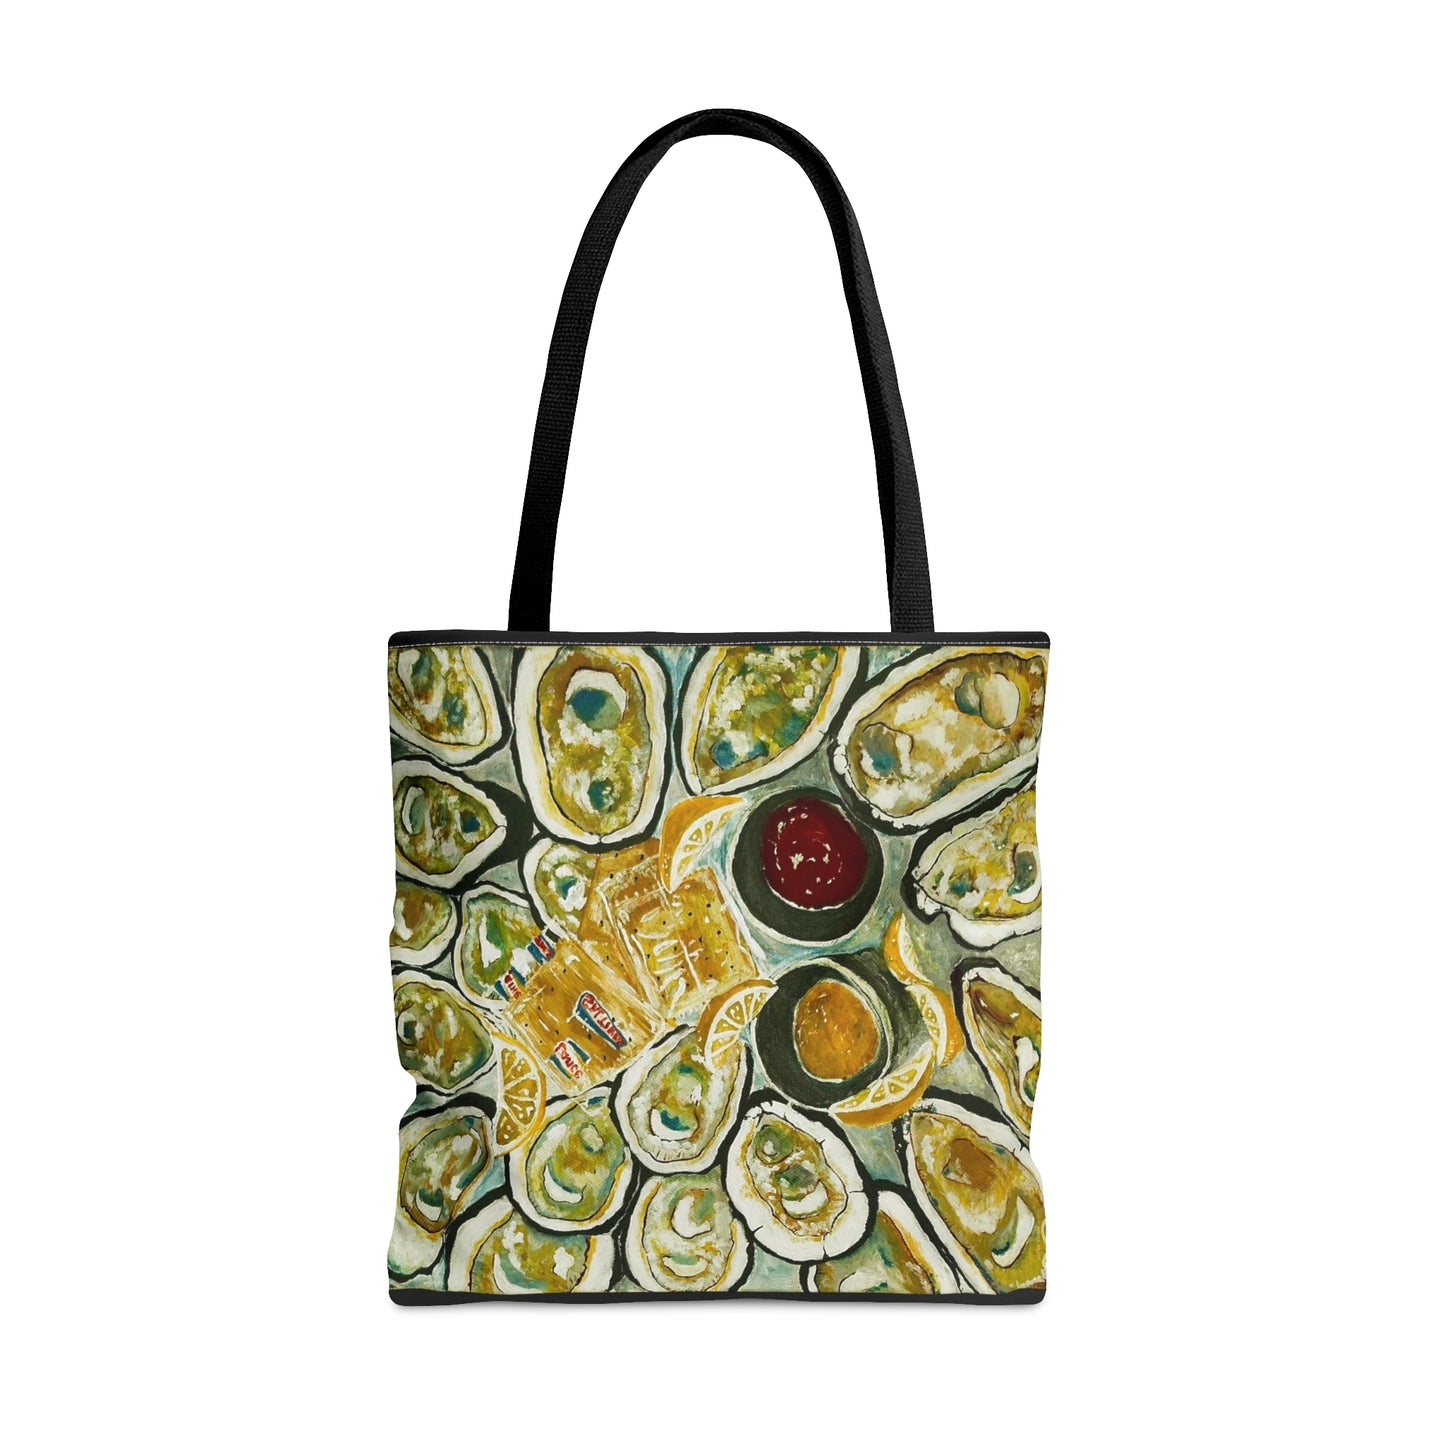 OystersOnTheHalfShell Tote Bag